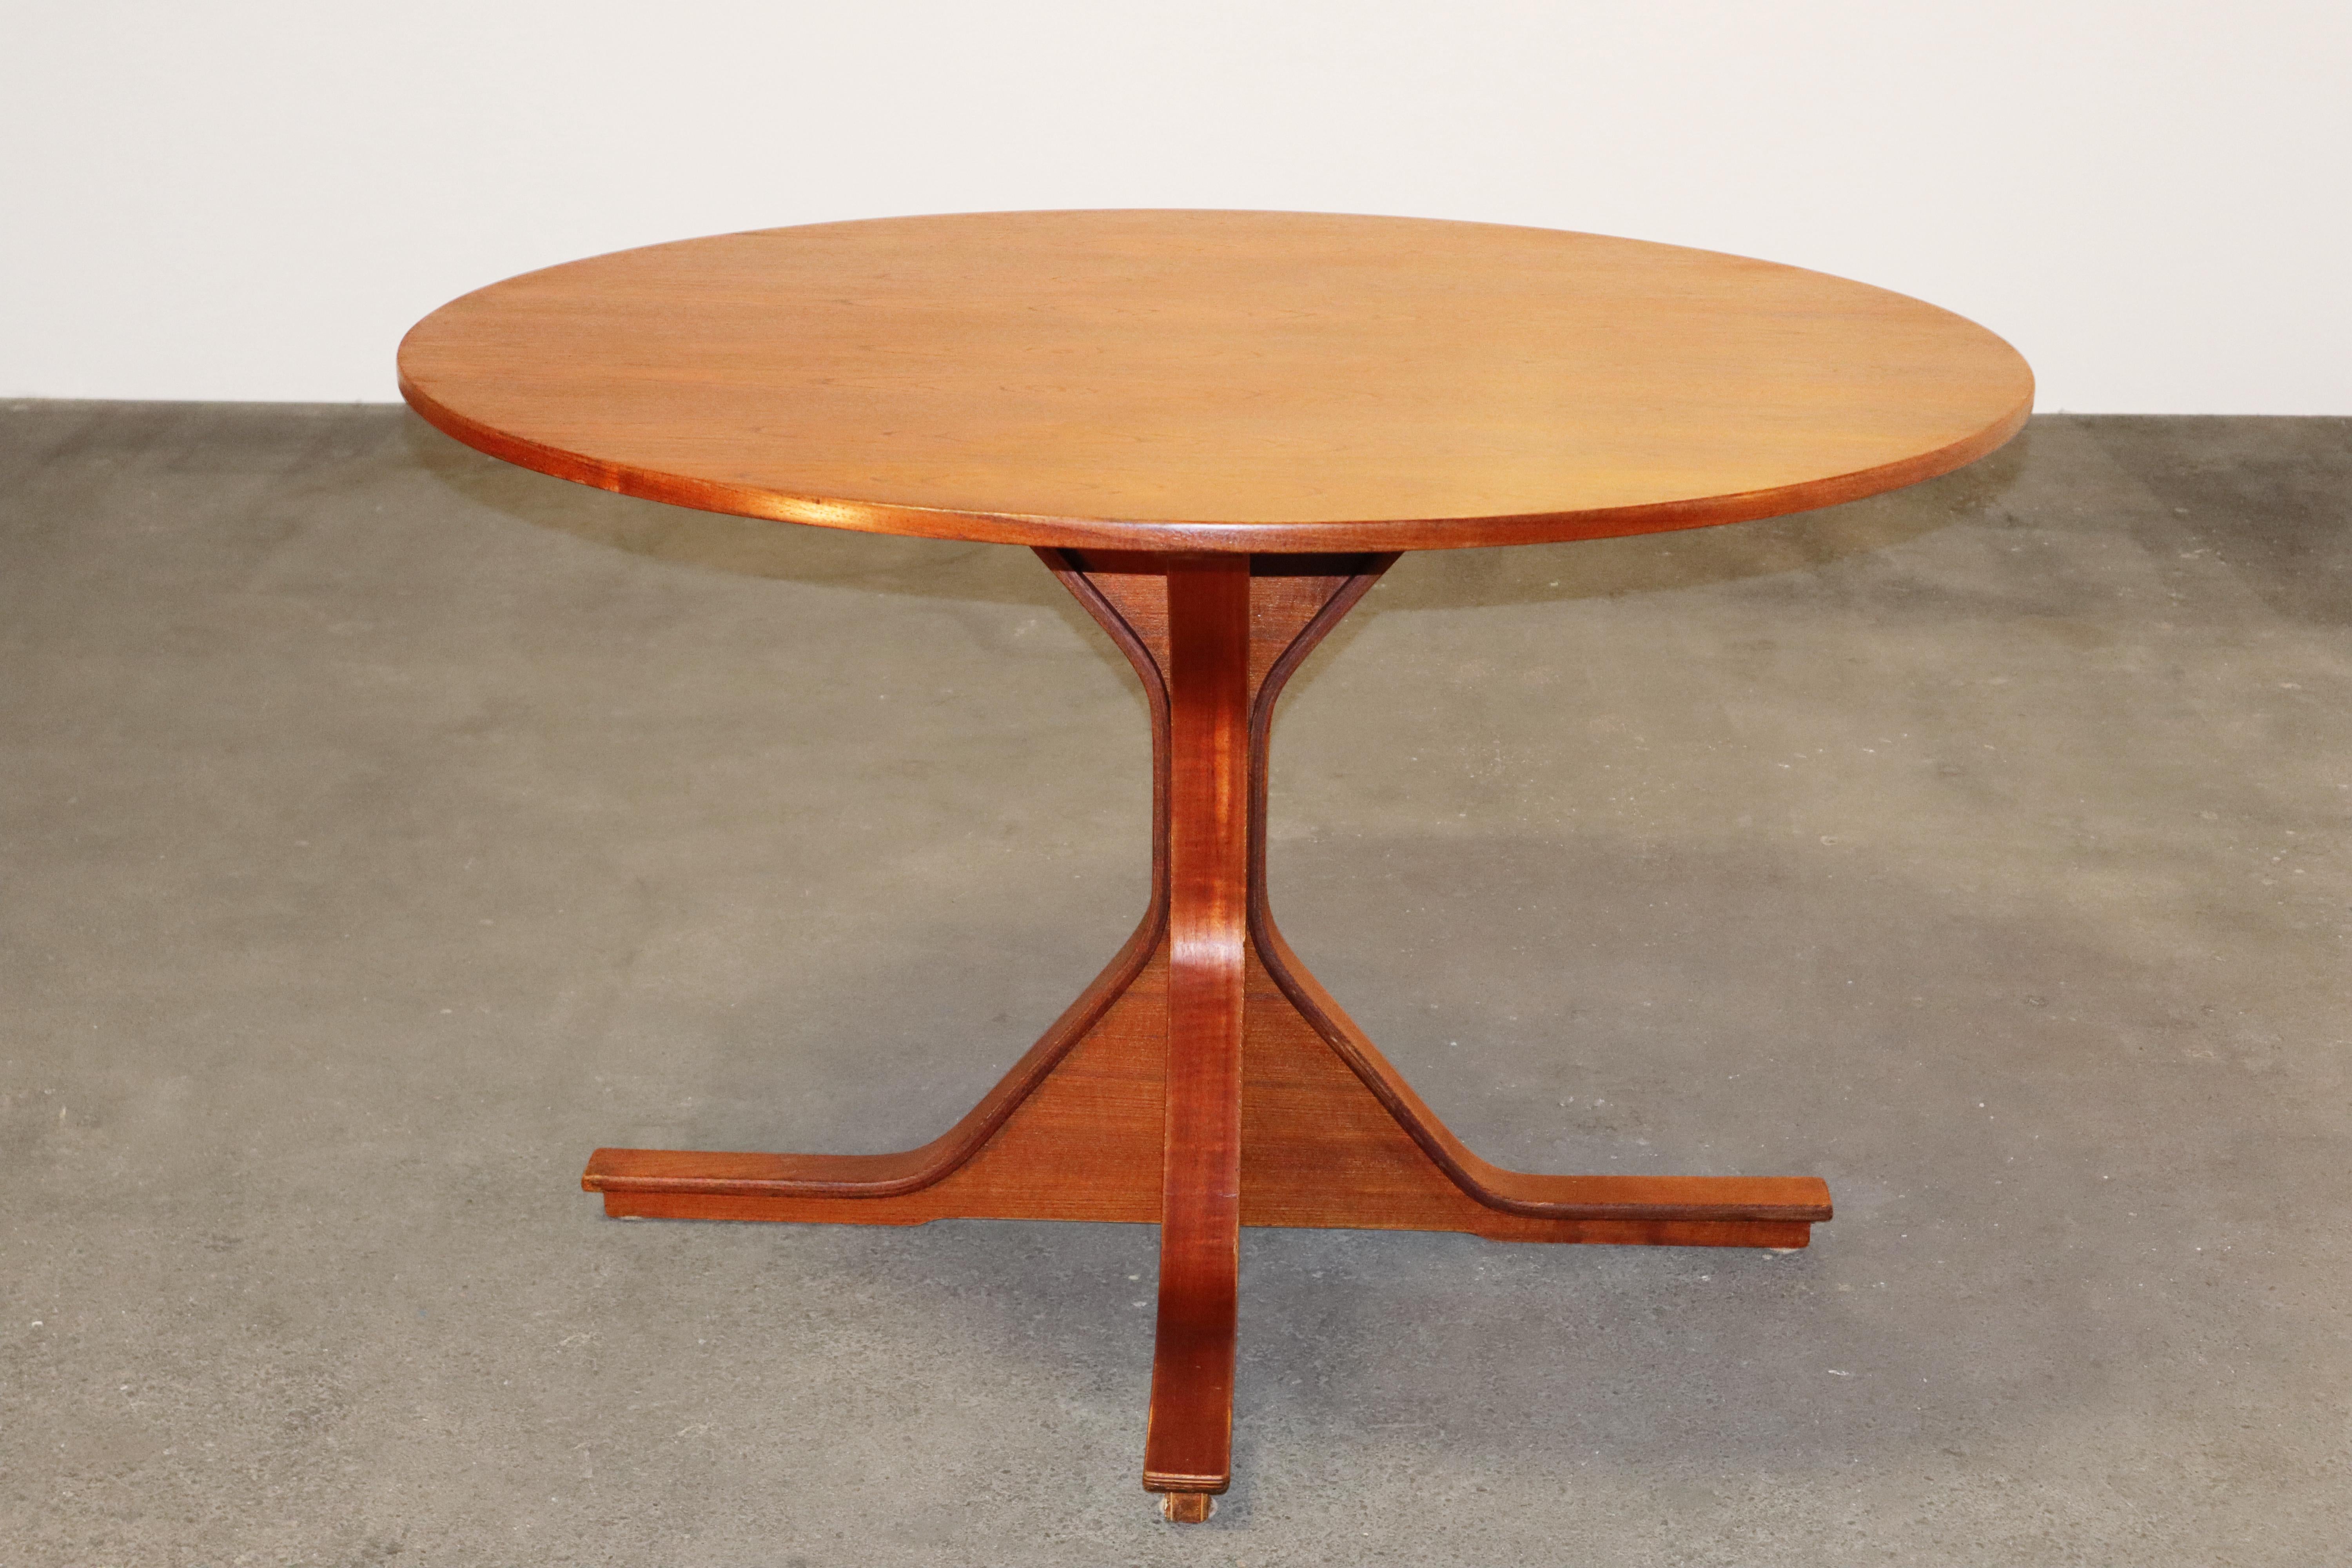 1960s Mid-Century Modern Italian round dining table, model 522, by Gianfranco Frattini for Bernini.

Clean, sculptural and Rationalist-influenced geometric and angular forms are fascinatingly paired with a rich and decorative dark exotic hardwood.